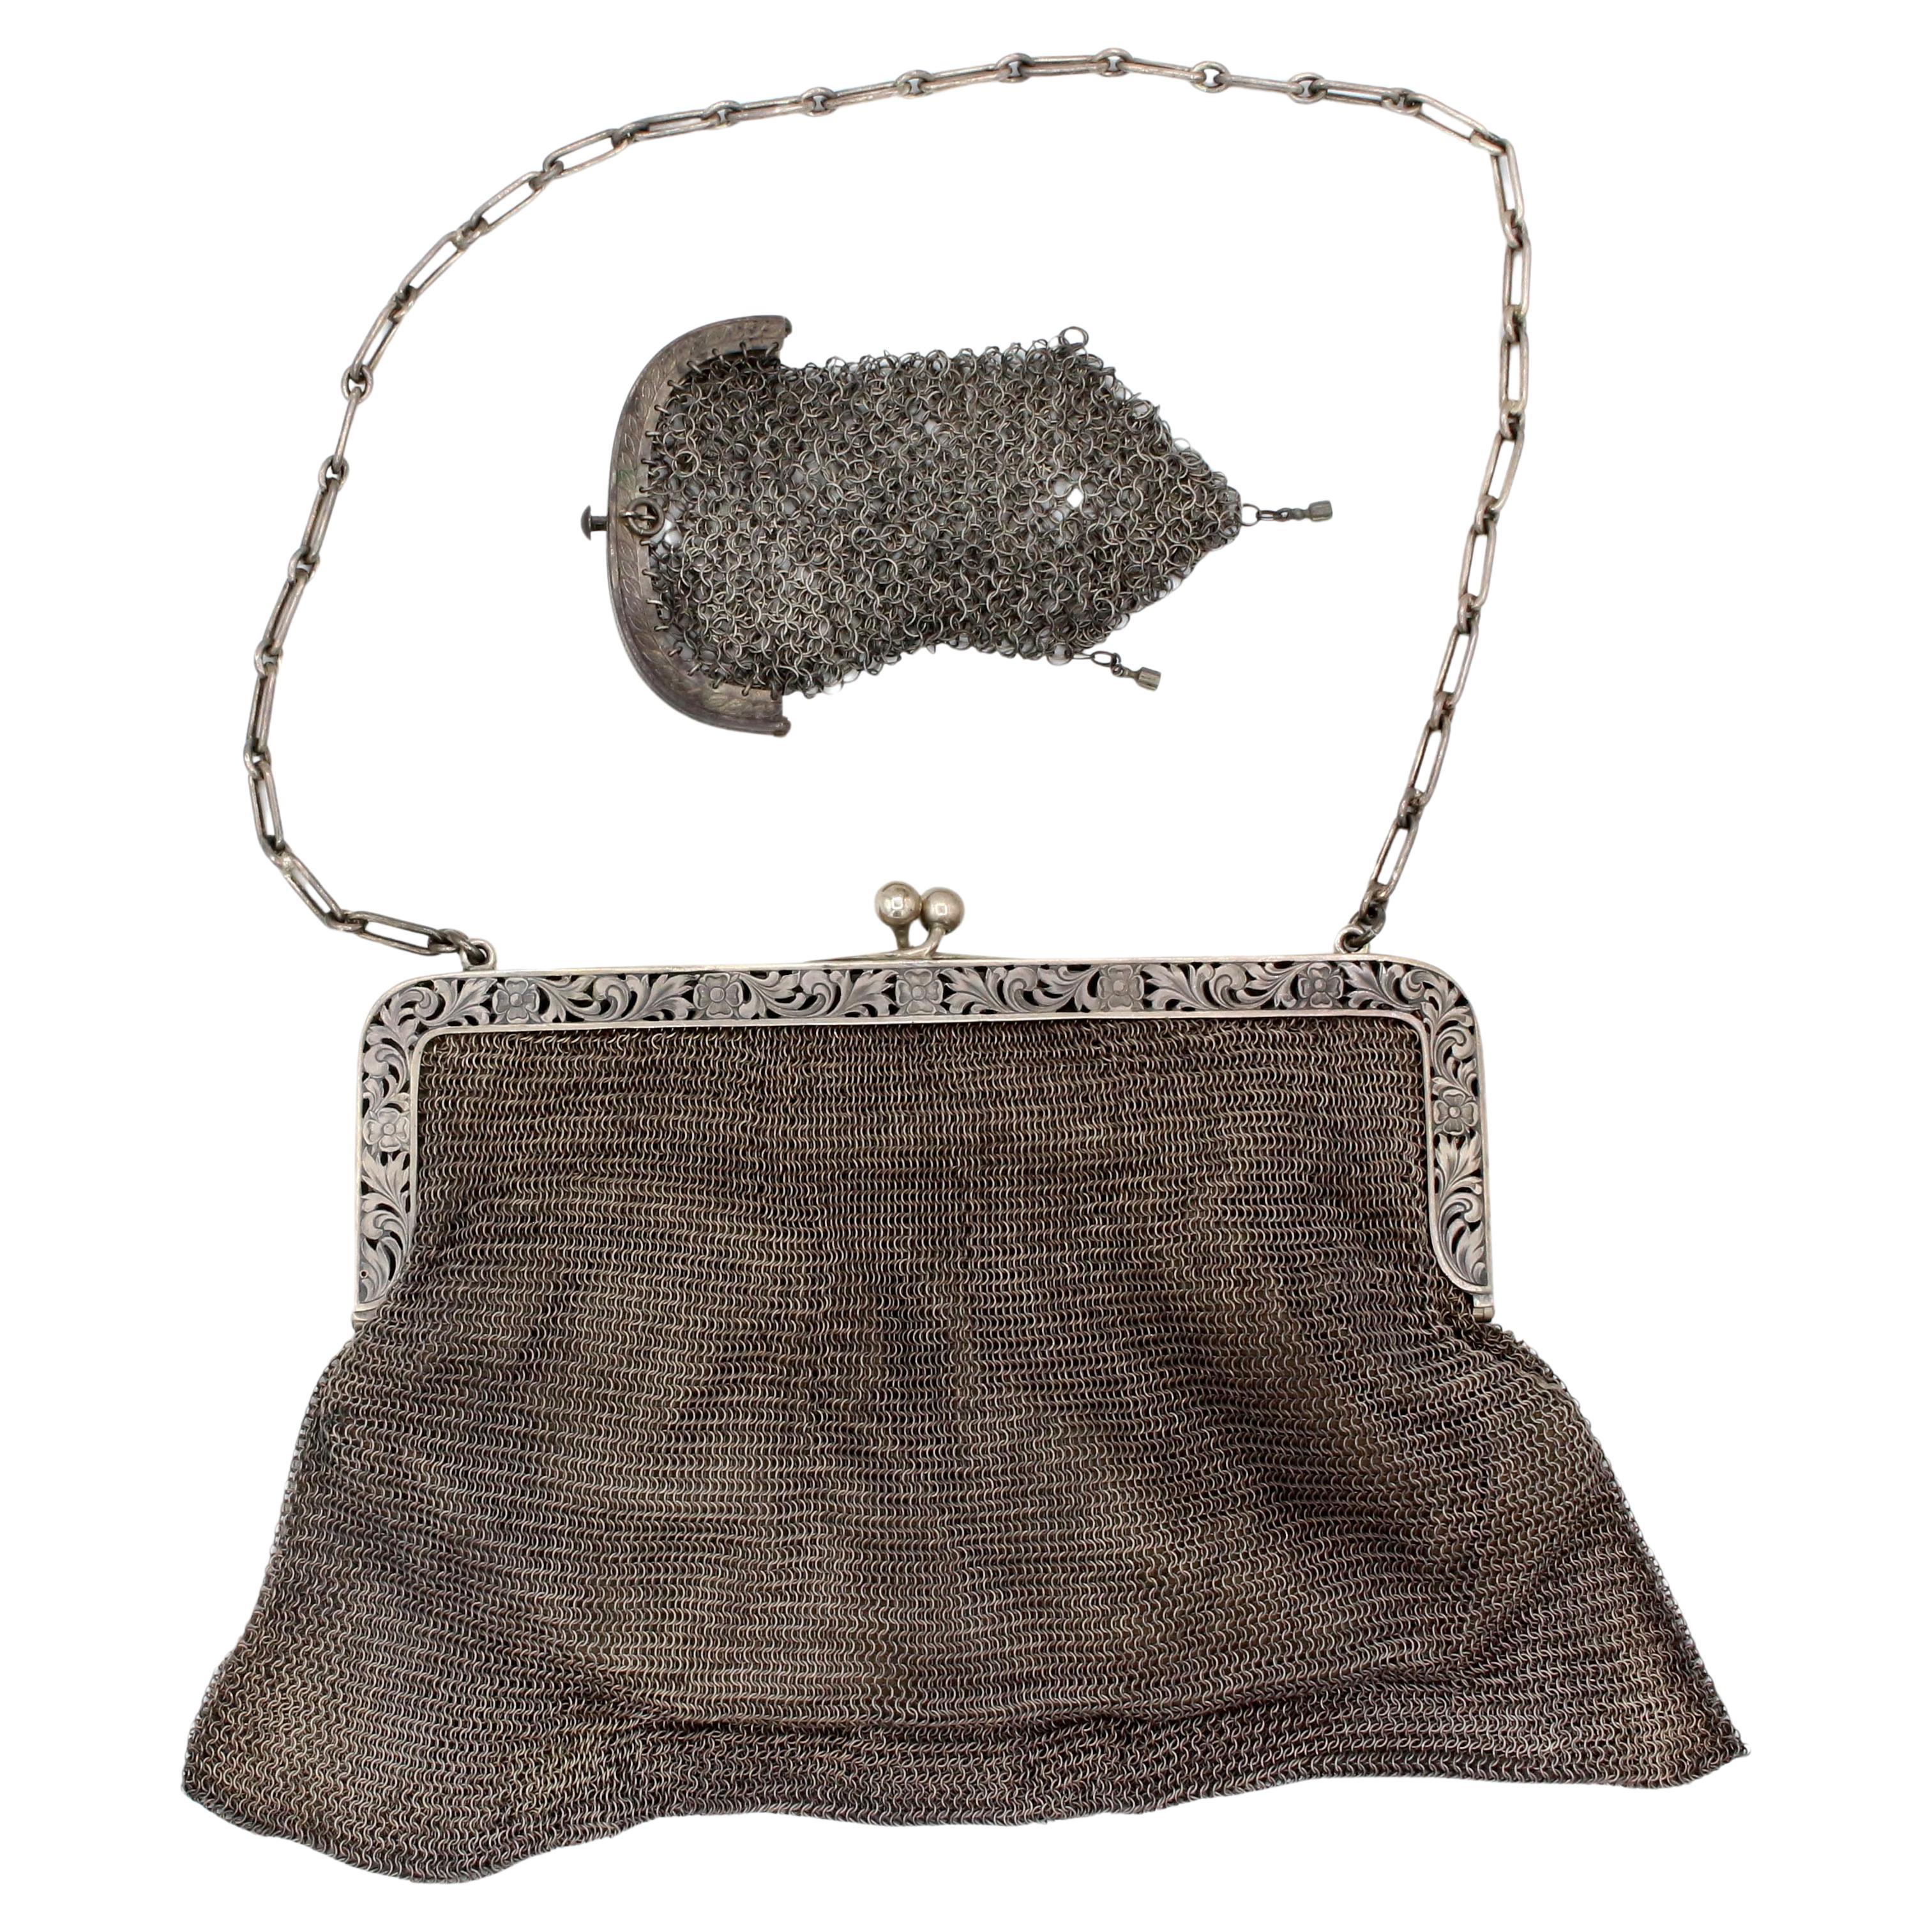 Continental 800 Standard Silver Purse, late 19th-early 20th century